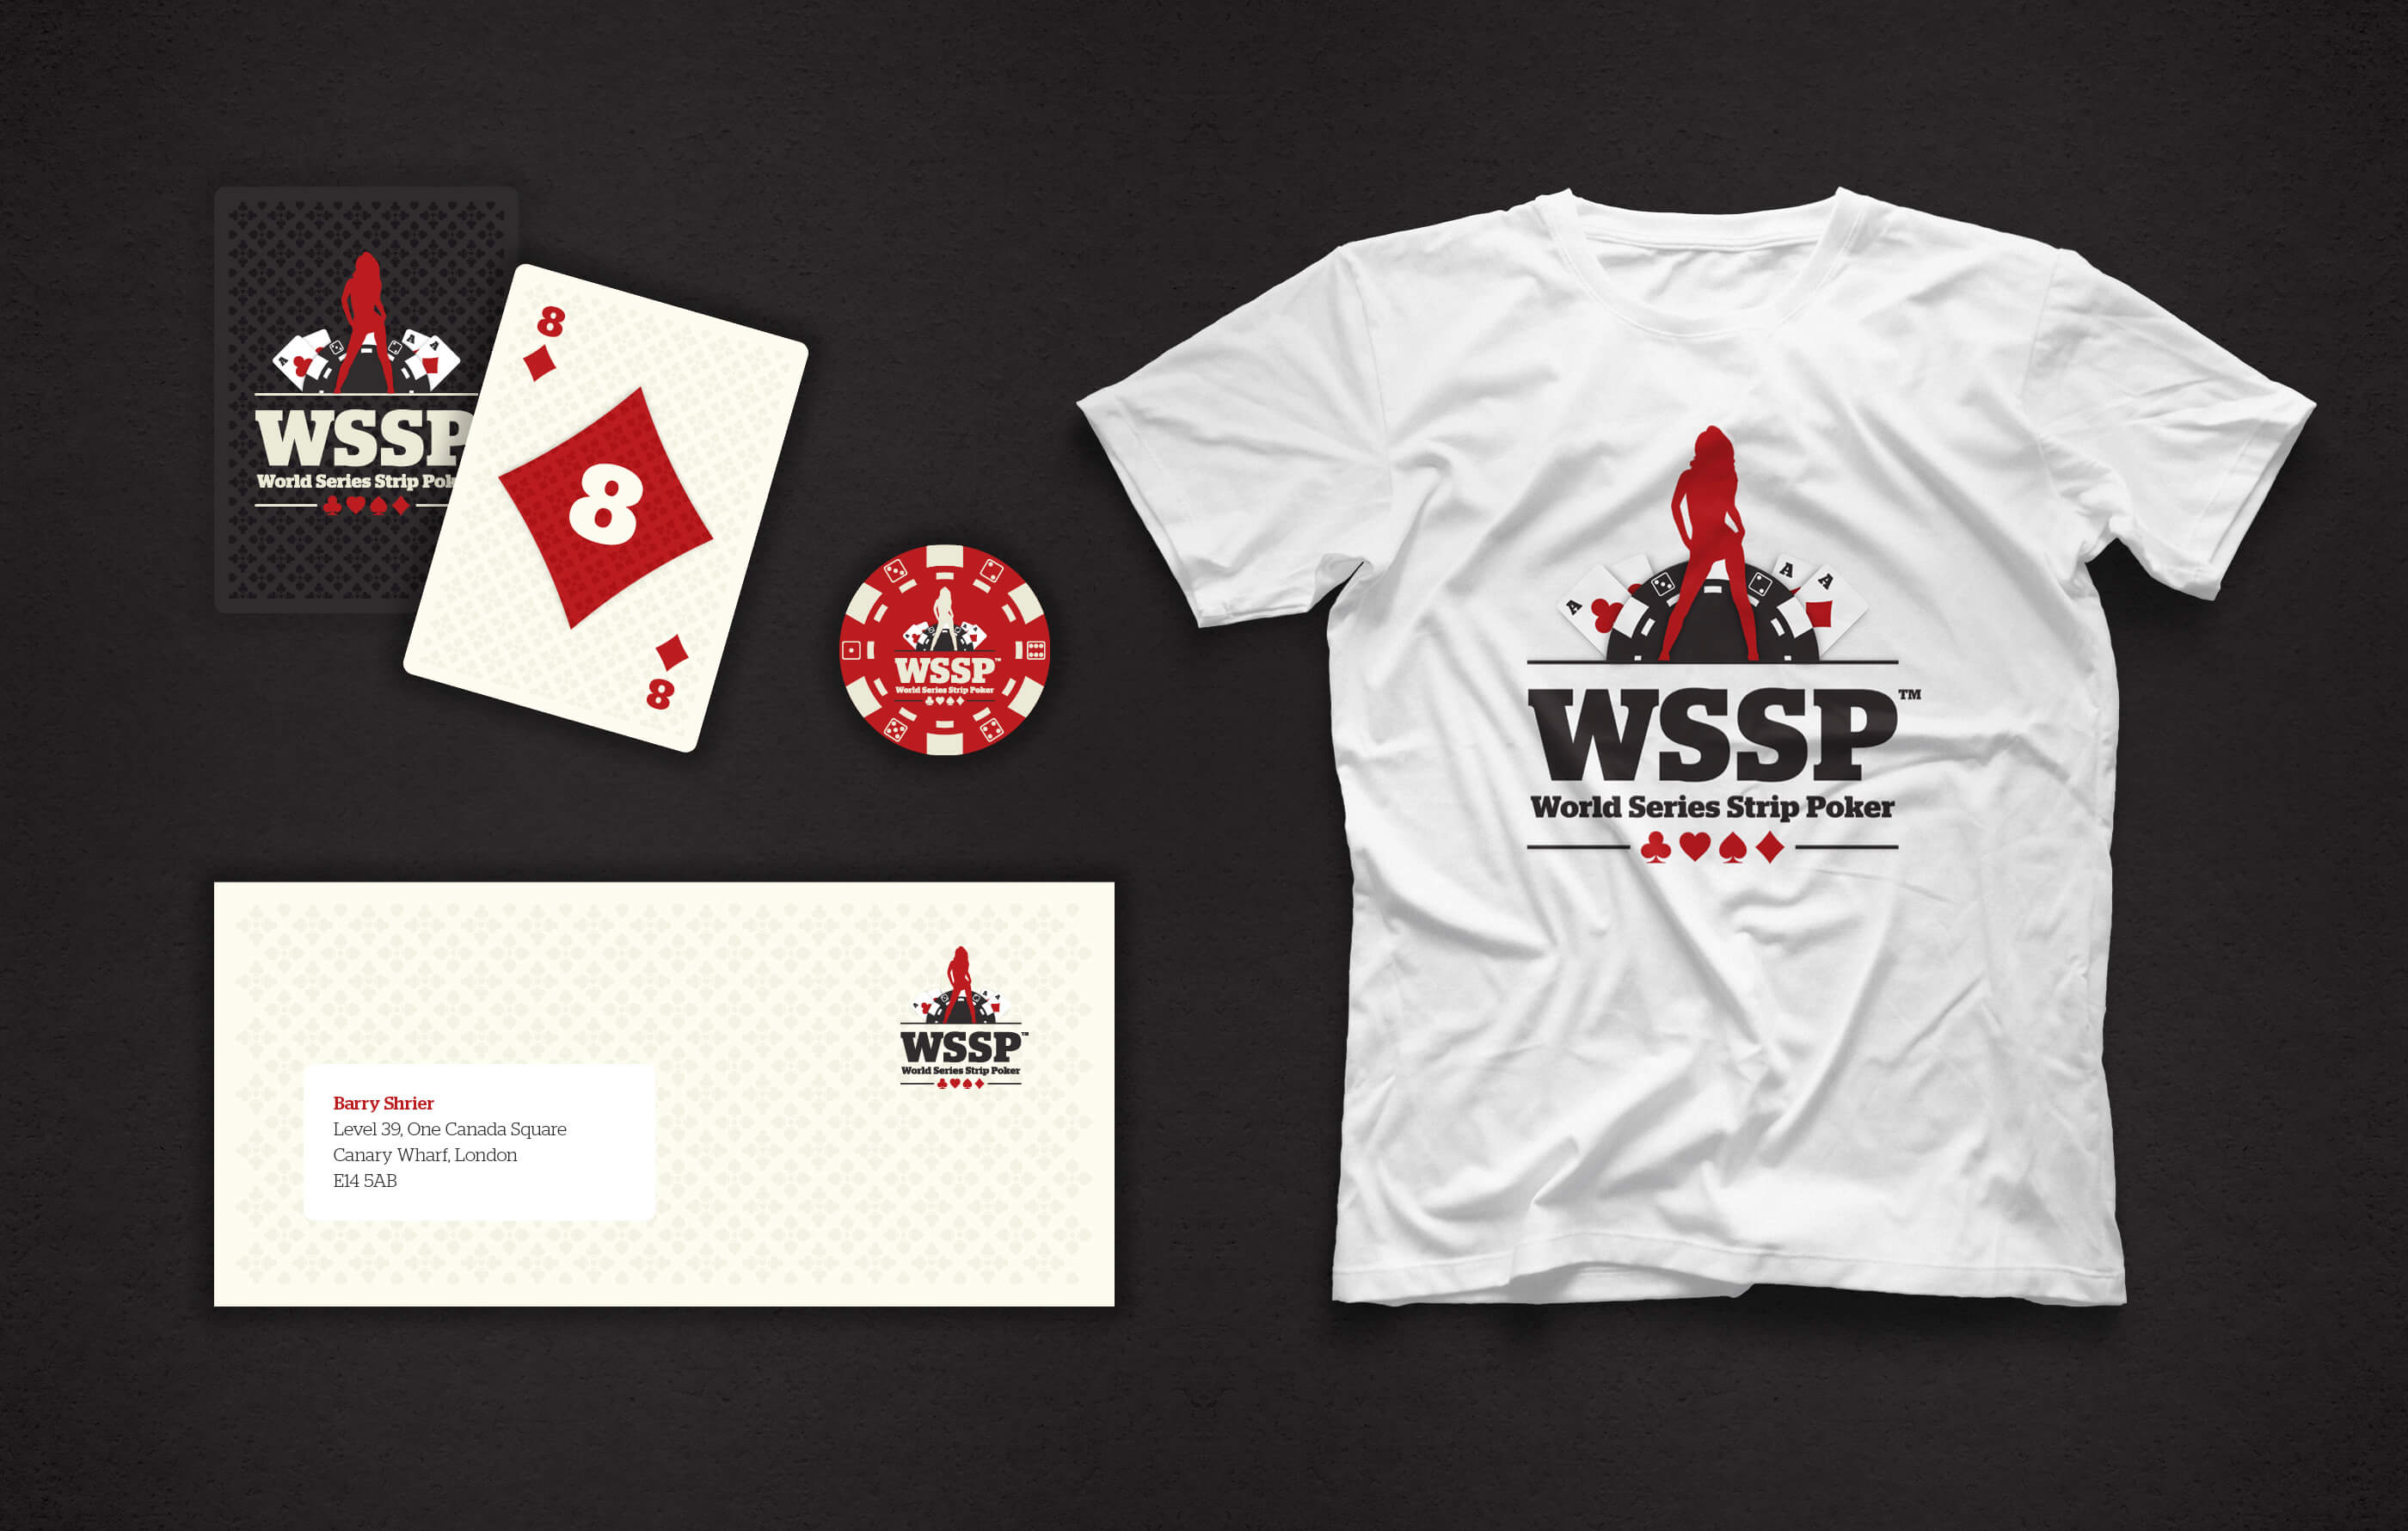 Branded WSSP collateral, including front and back design of the Queen of Clubs, a red clay poker chip, beige envelope addressed to Barry Shrier and a white tee